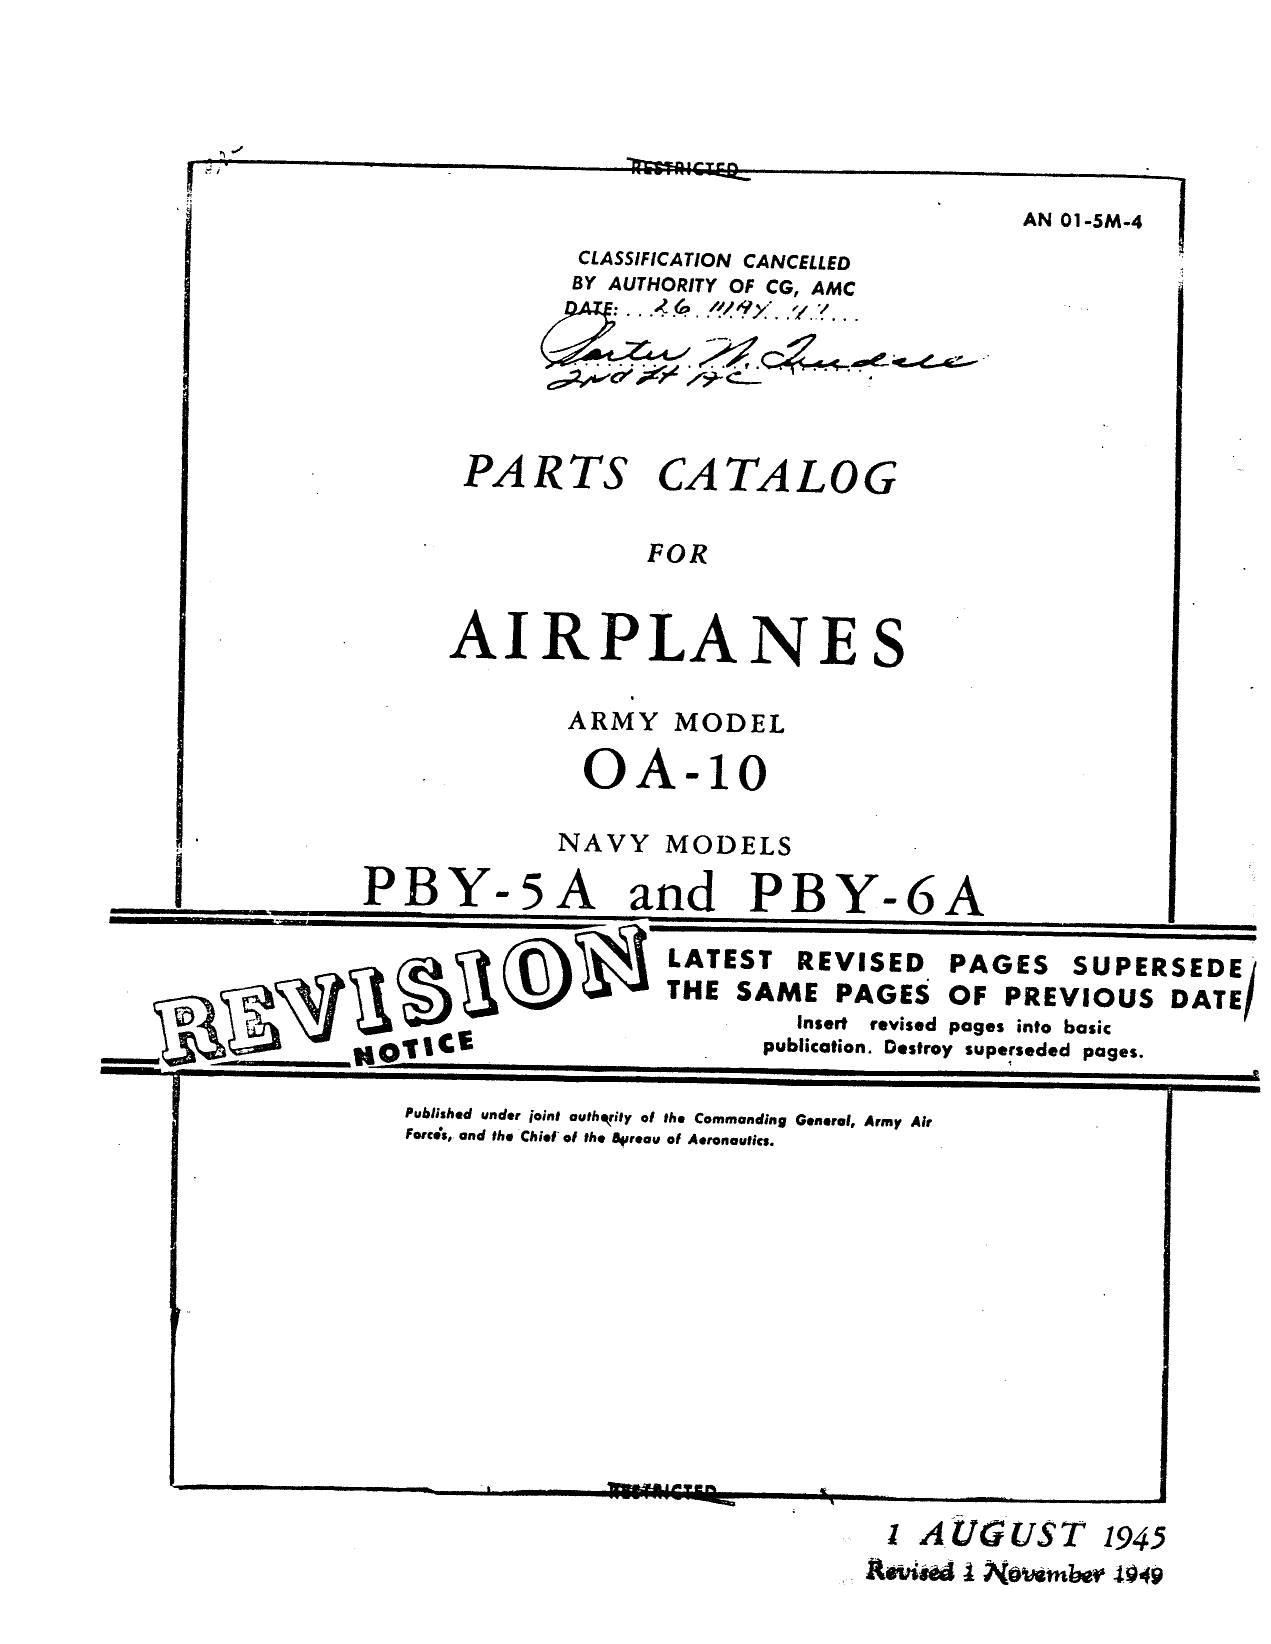 Sample page 1 from AirCorps Library document: Parts Catalog for OA-10, PBY-5A, and PBY-6A